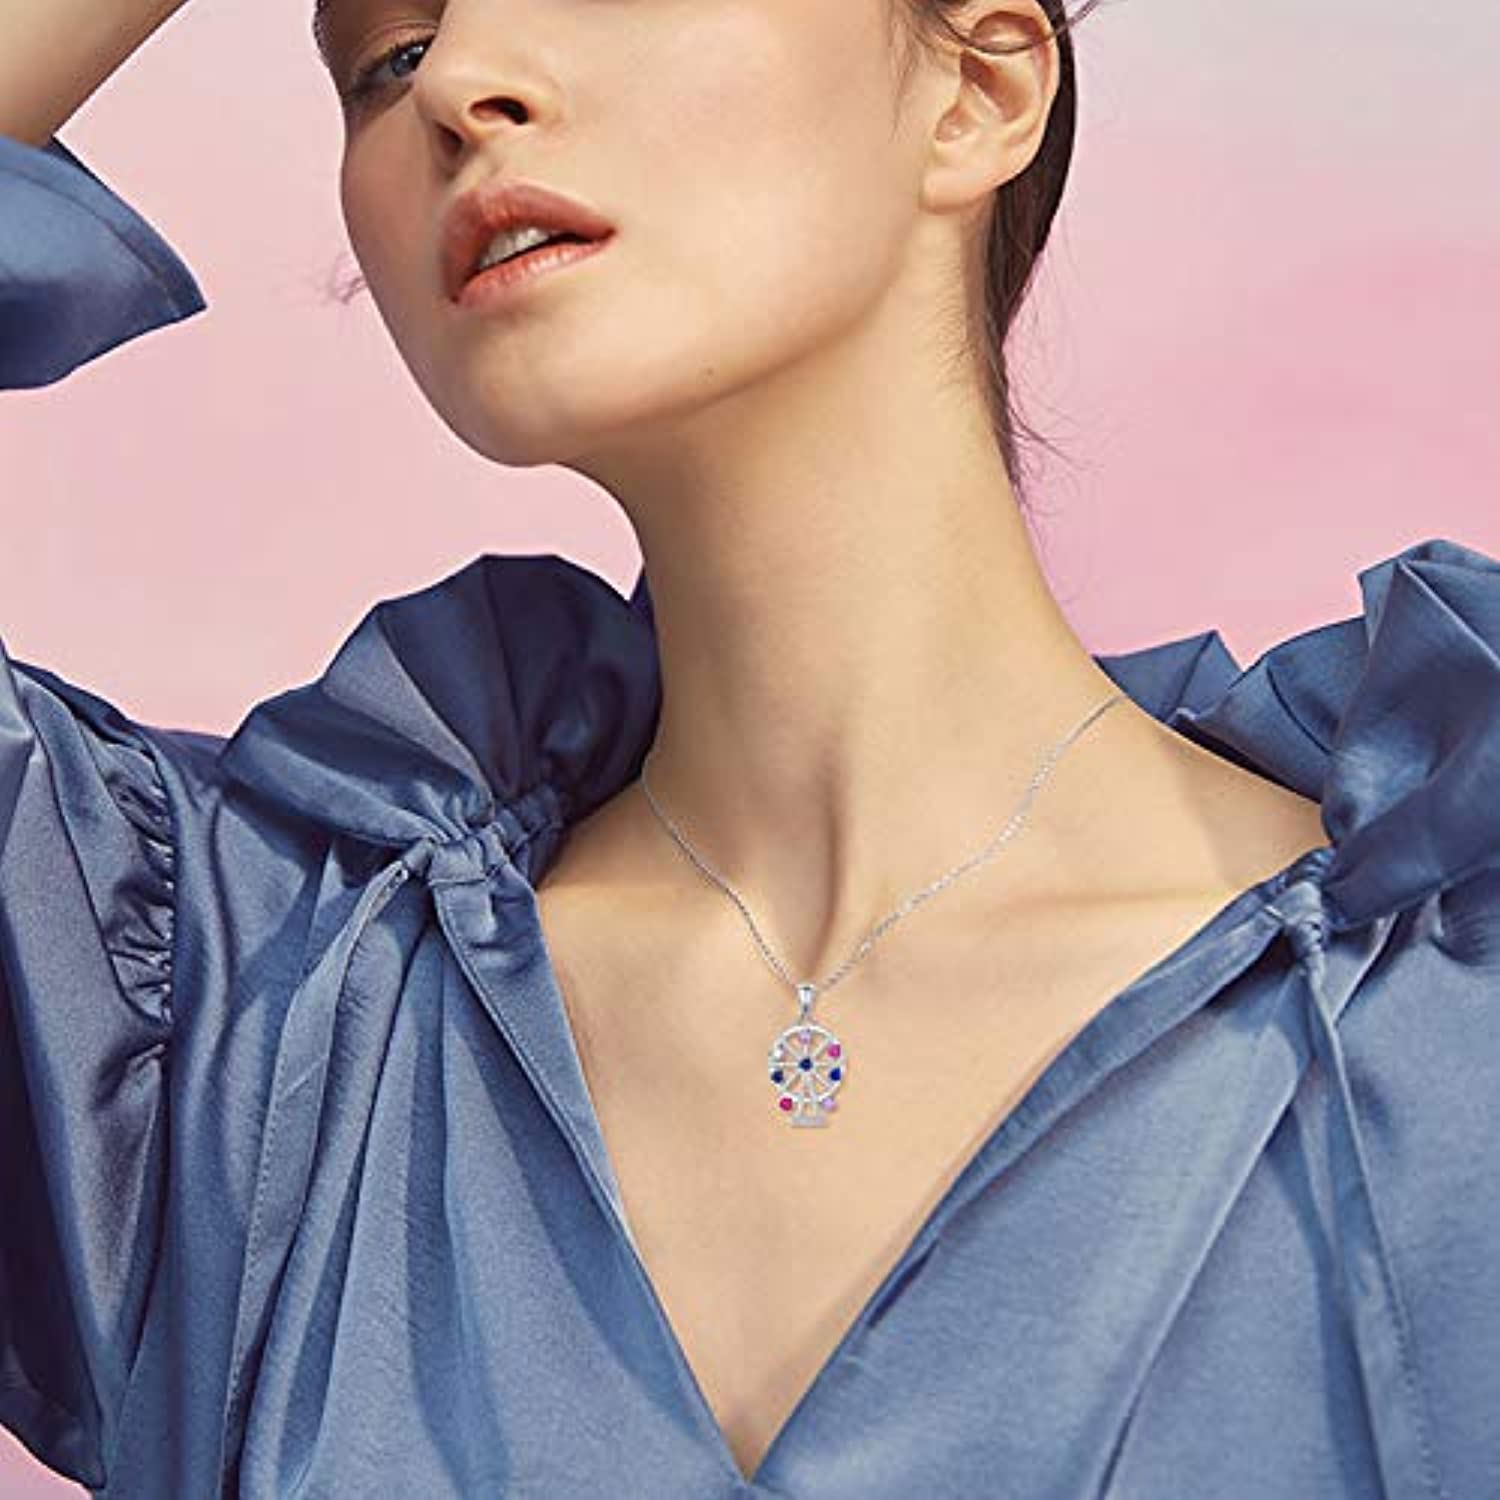 Ferris Wheel Dainty Necklace, 925 Sliver Sterling  Necklaces Fantasy Pendant Collarbone Necklace for Women